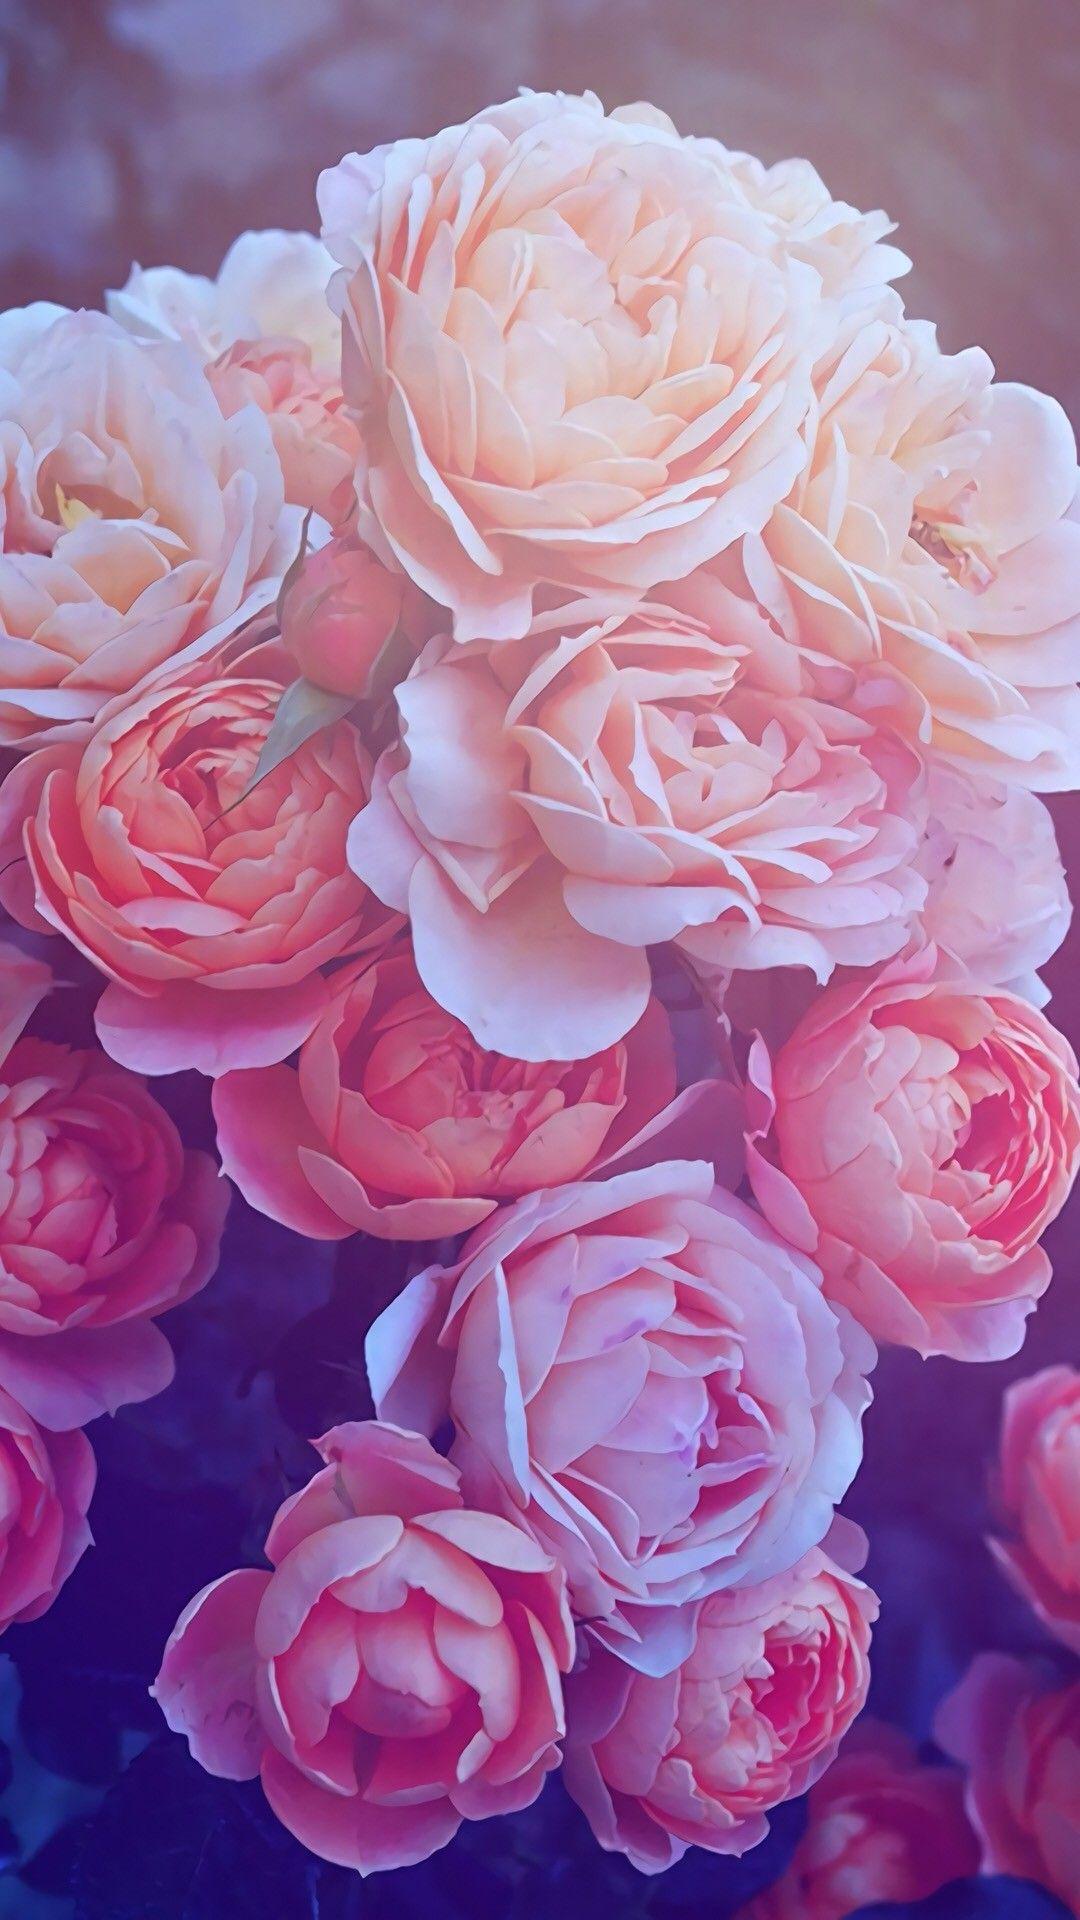 Romantic Red Rose Live Wallpaper for Phone - free download